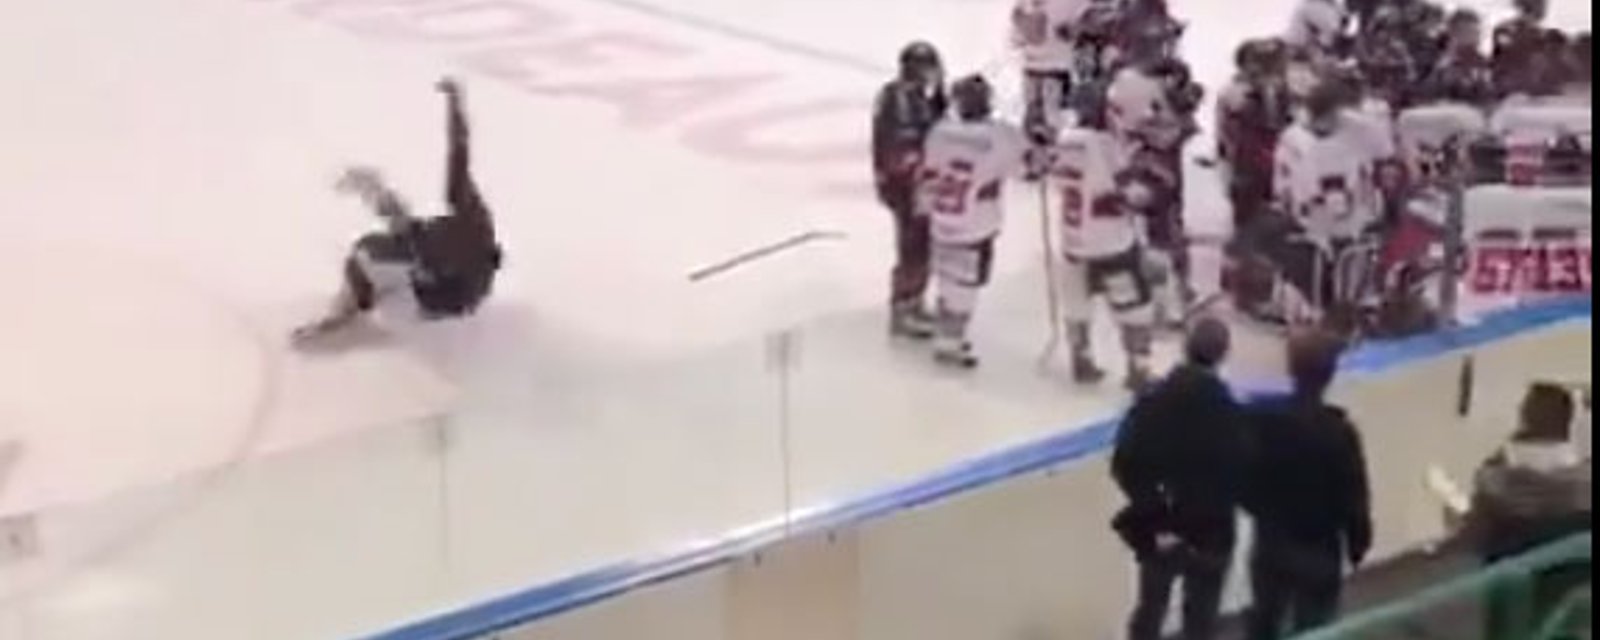 Player stretchered off the ice after brutal MMA style body slam!